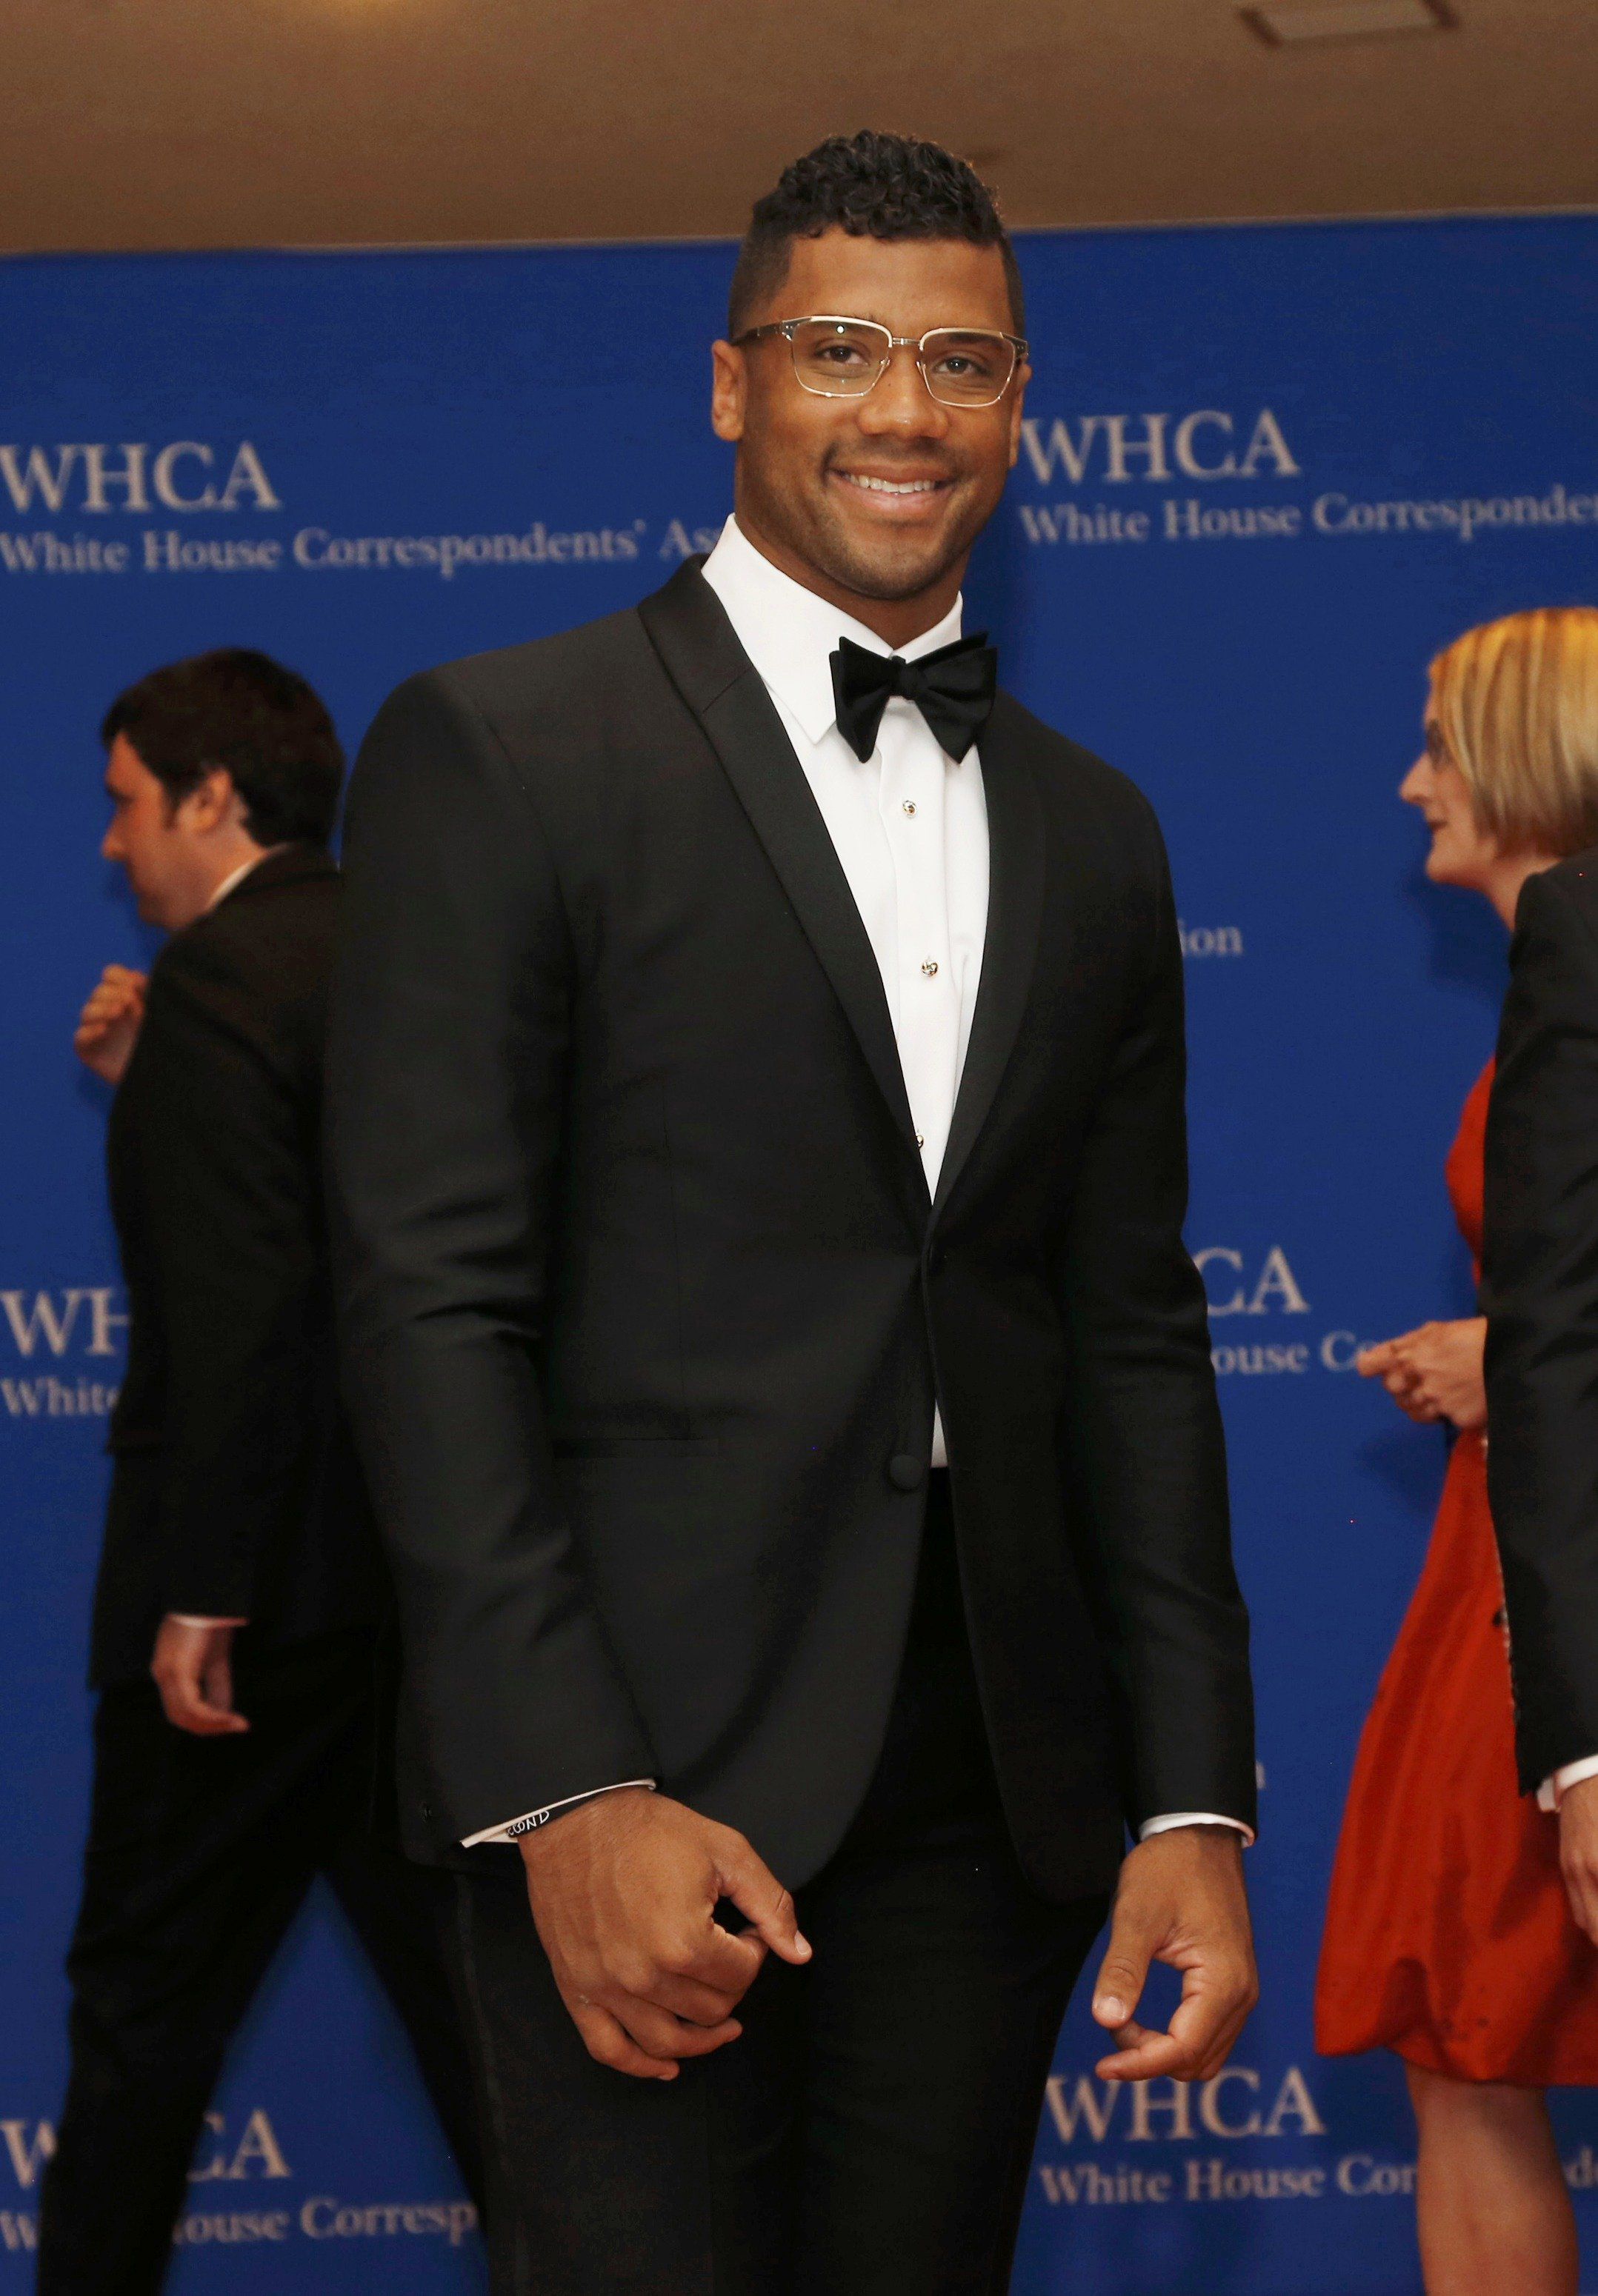 Seattle Seahawks quarterback Russell Wilson arrives for the annual White House Correspondents' Association dinner in Washington